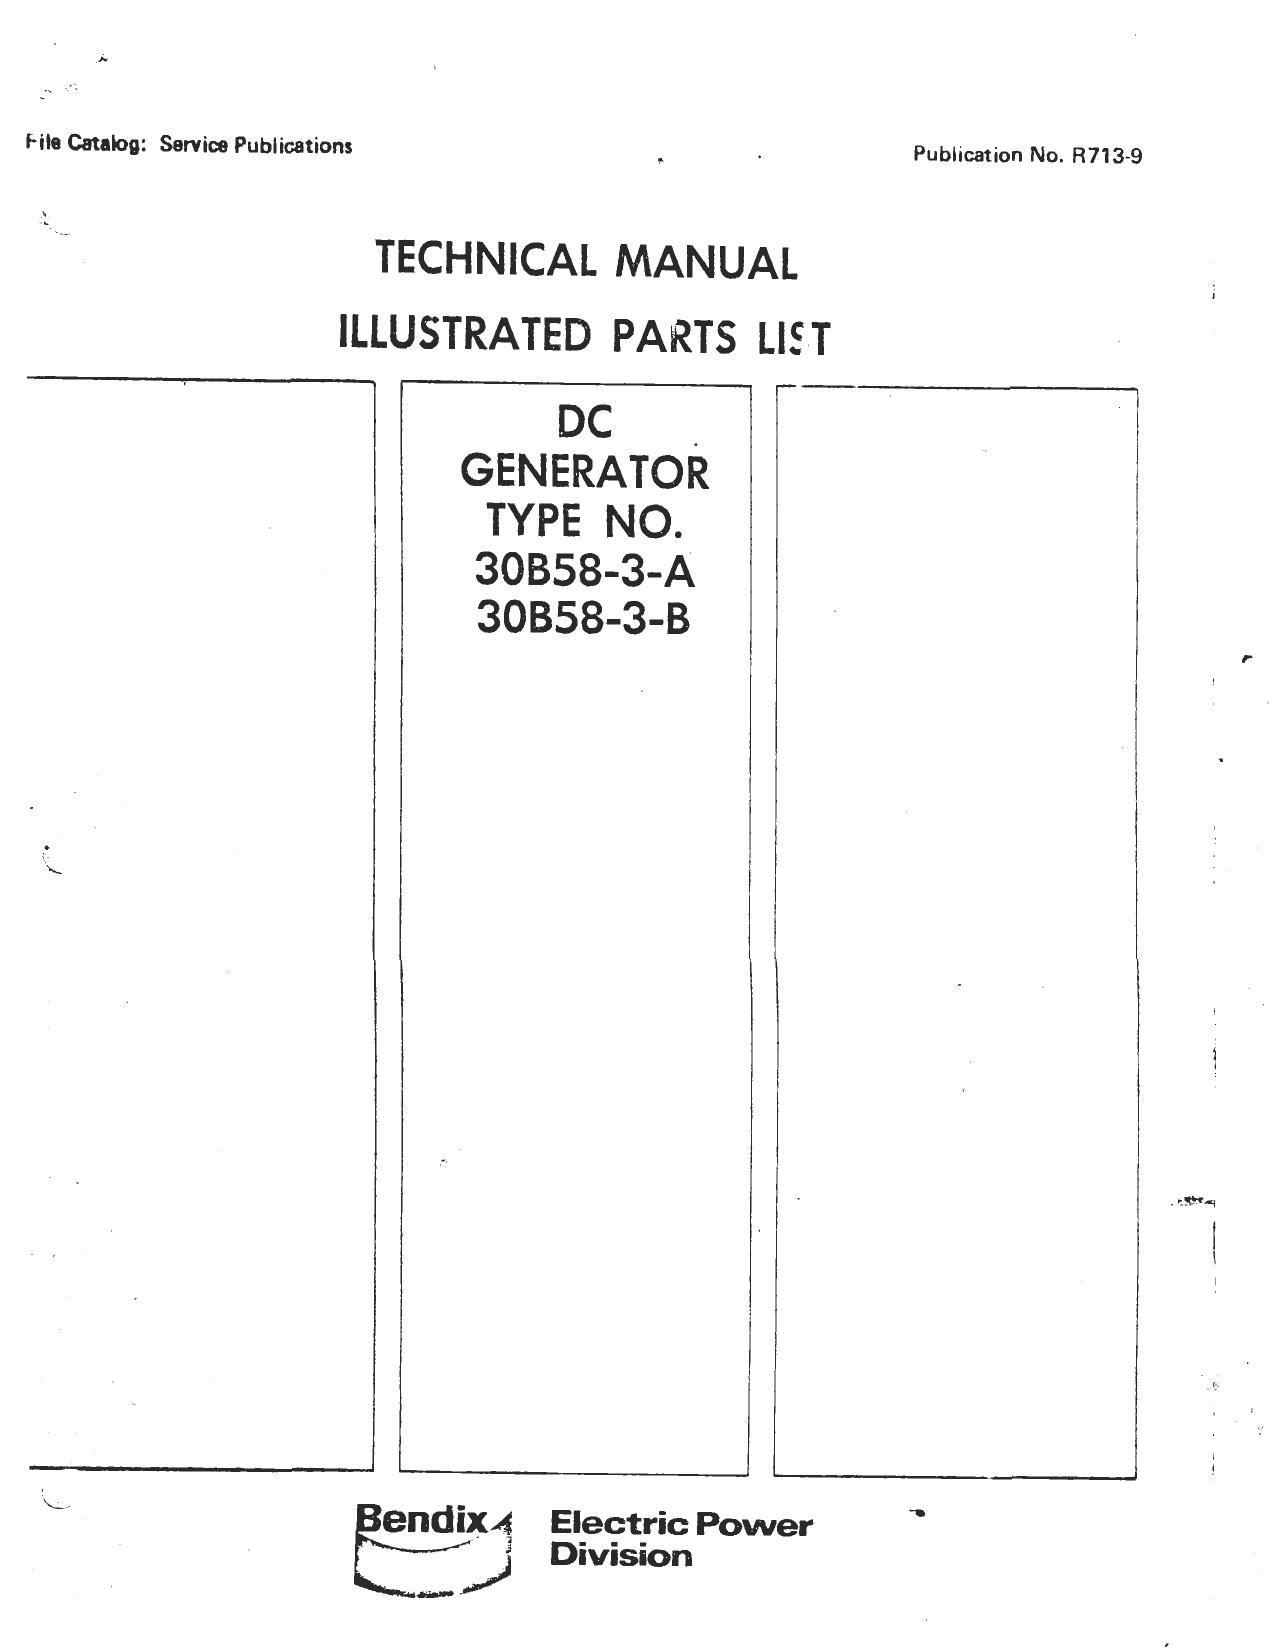 Sample page 1 from AirCorps Library document: Illustrated Parts List for DC Generator - Type 30B58-3-A, 30B58-3-B 